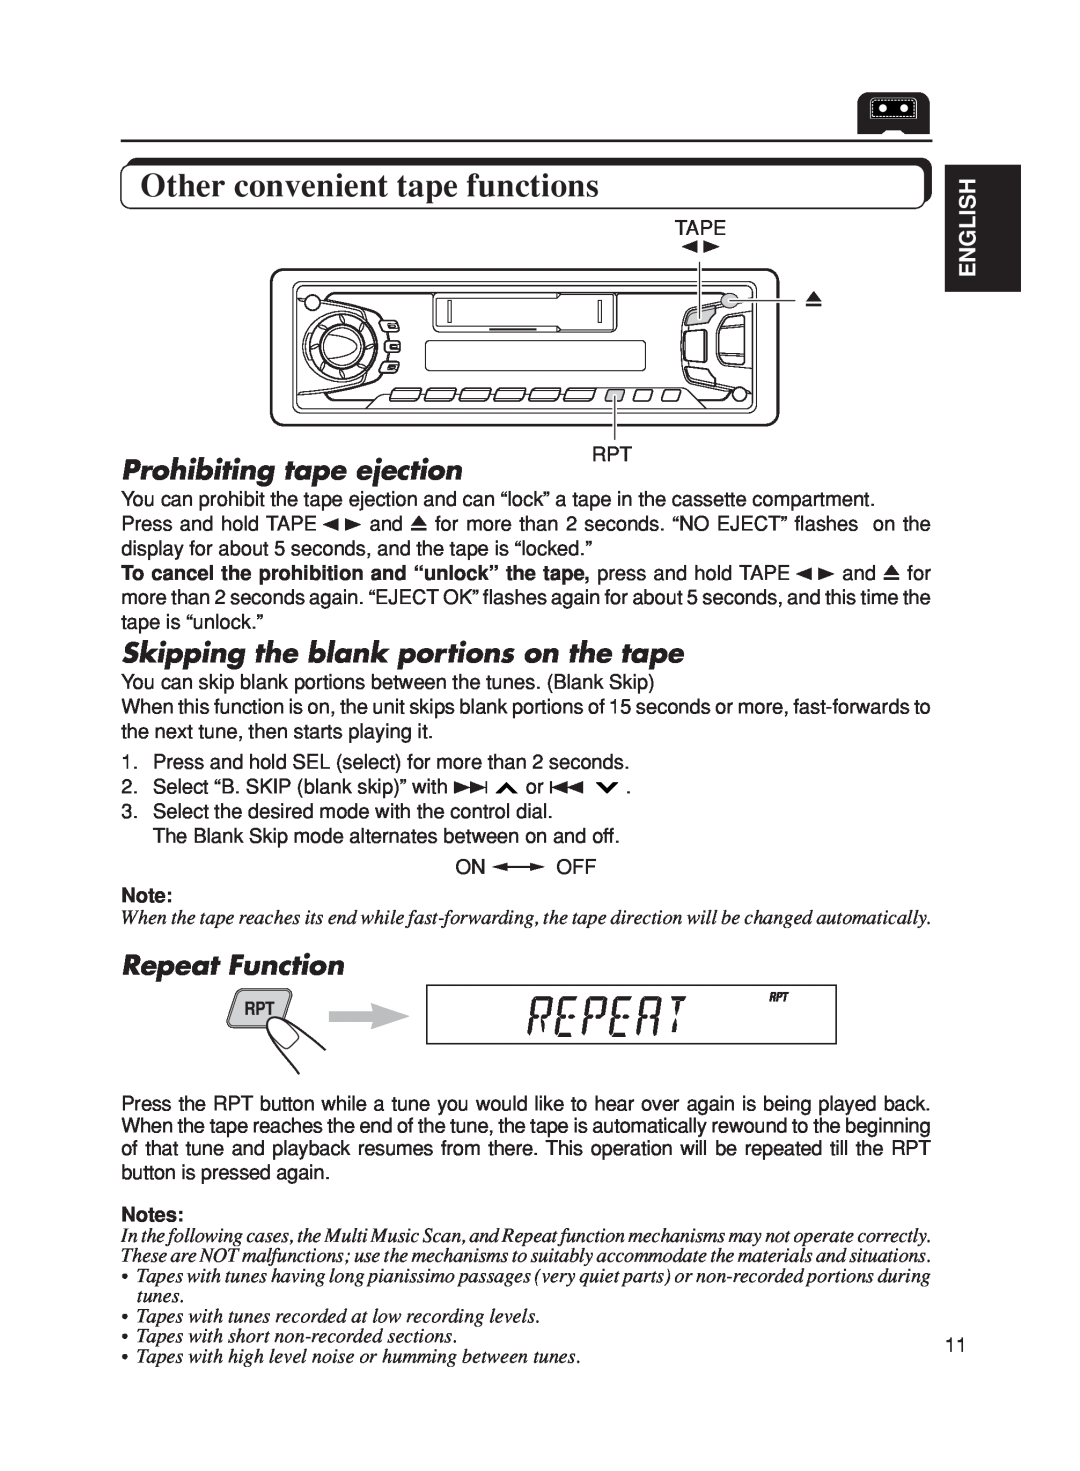 JVC KS-FX270 Other convenient tape functions, Prohibiting tape ejection, Skipping the blank portions on the tape, English 